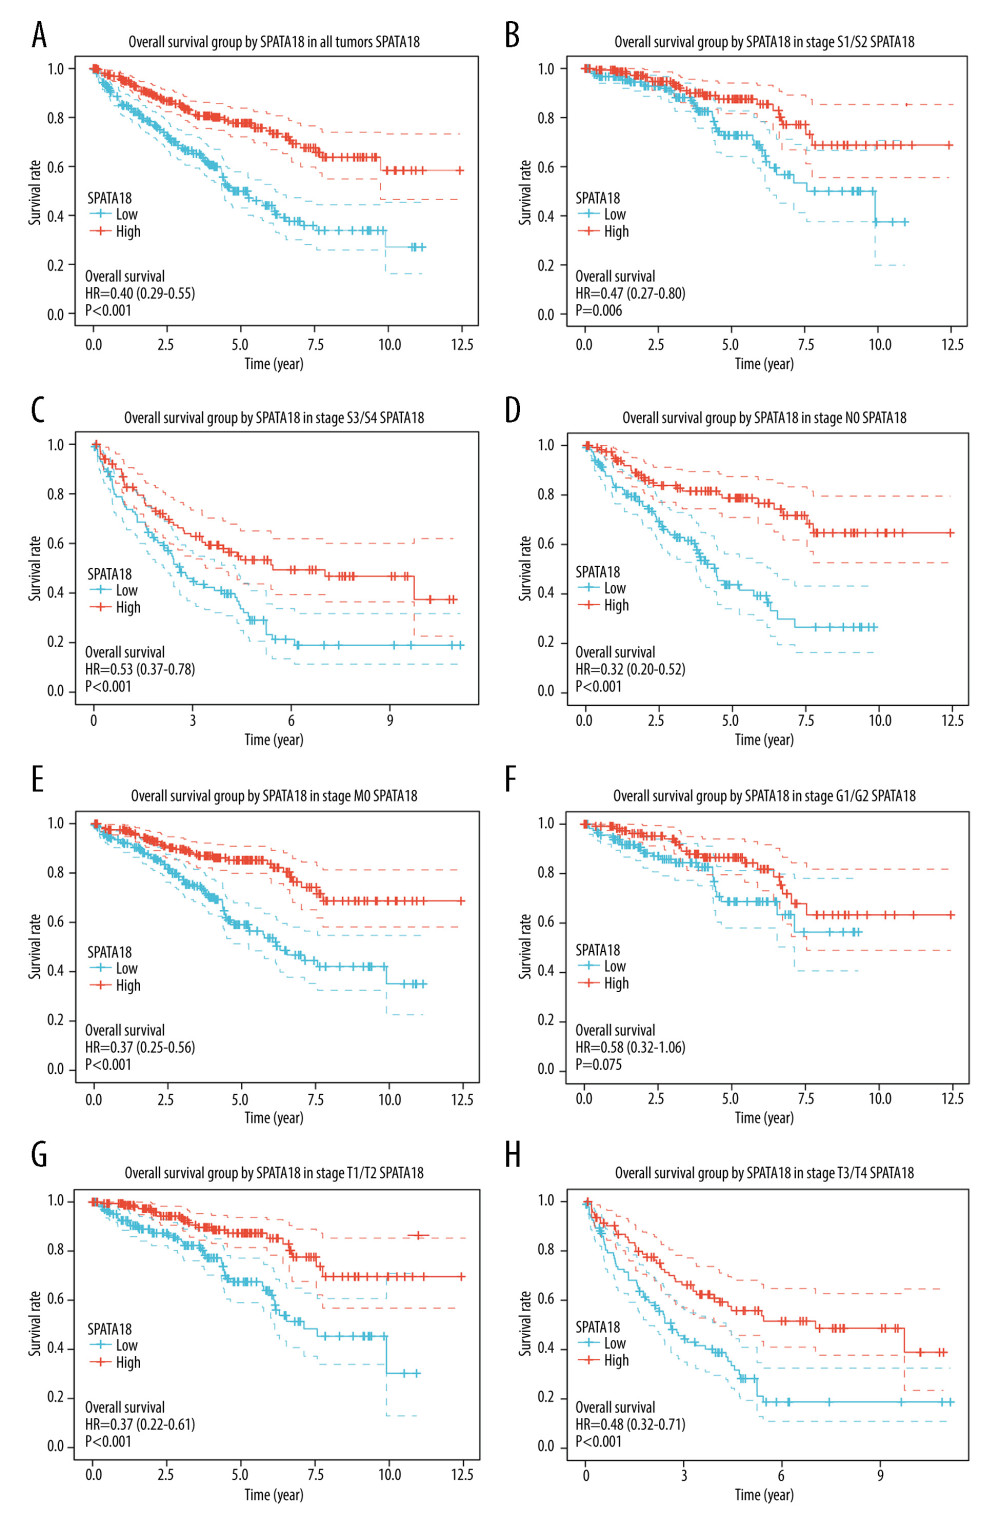 Overall survival analysis with SPATA18 mRNA expression. (A) Kaplan-Meier curves for overall survival in ccRCC for all cases, (B) clinical stage I/II, (C) clinical stage III/IV, (D) N0, (E) M0, (F) G1/G2, (G) T1/T2, (H) T3/T4 (R studio, version 3.6.3).